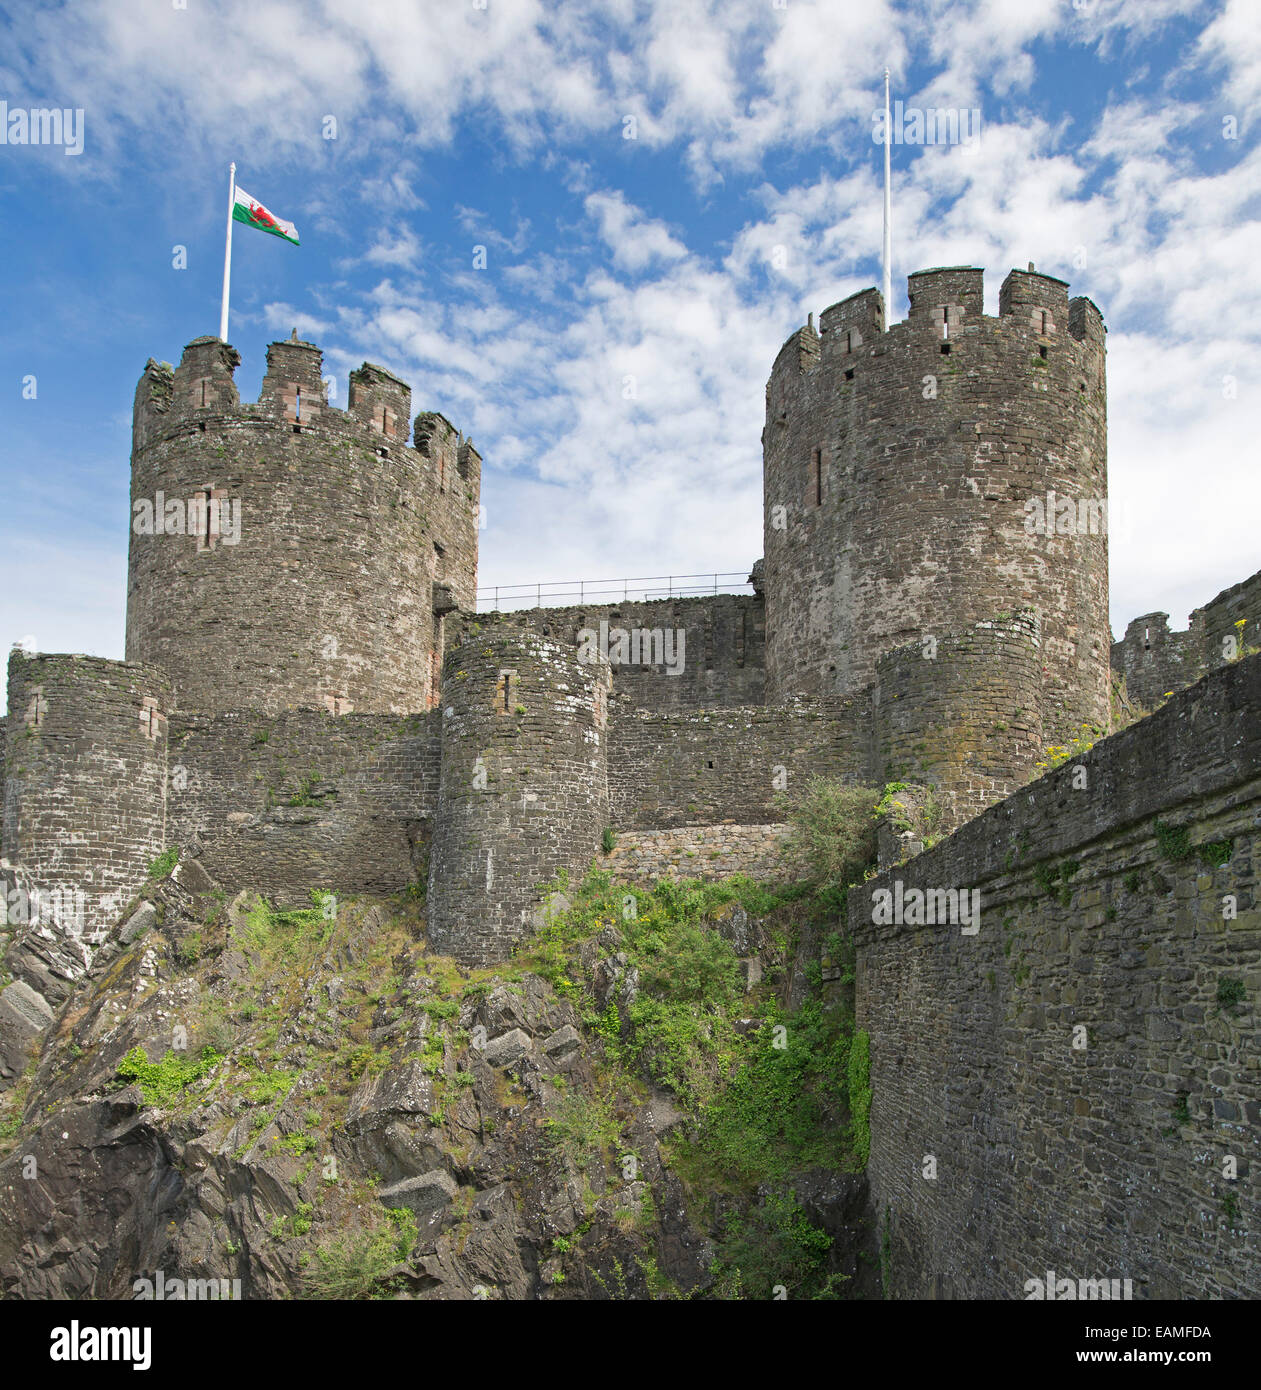 Magnificent 13th century Conwy castle in Wales with huge round towers spearing into blue sky streaked with clouds Stock Photo